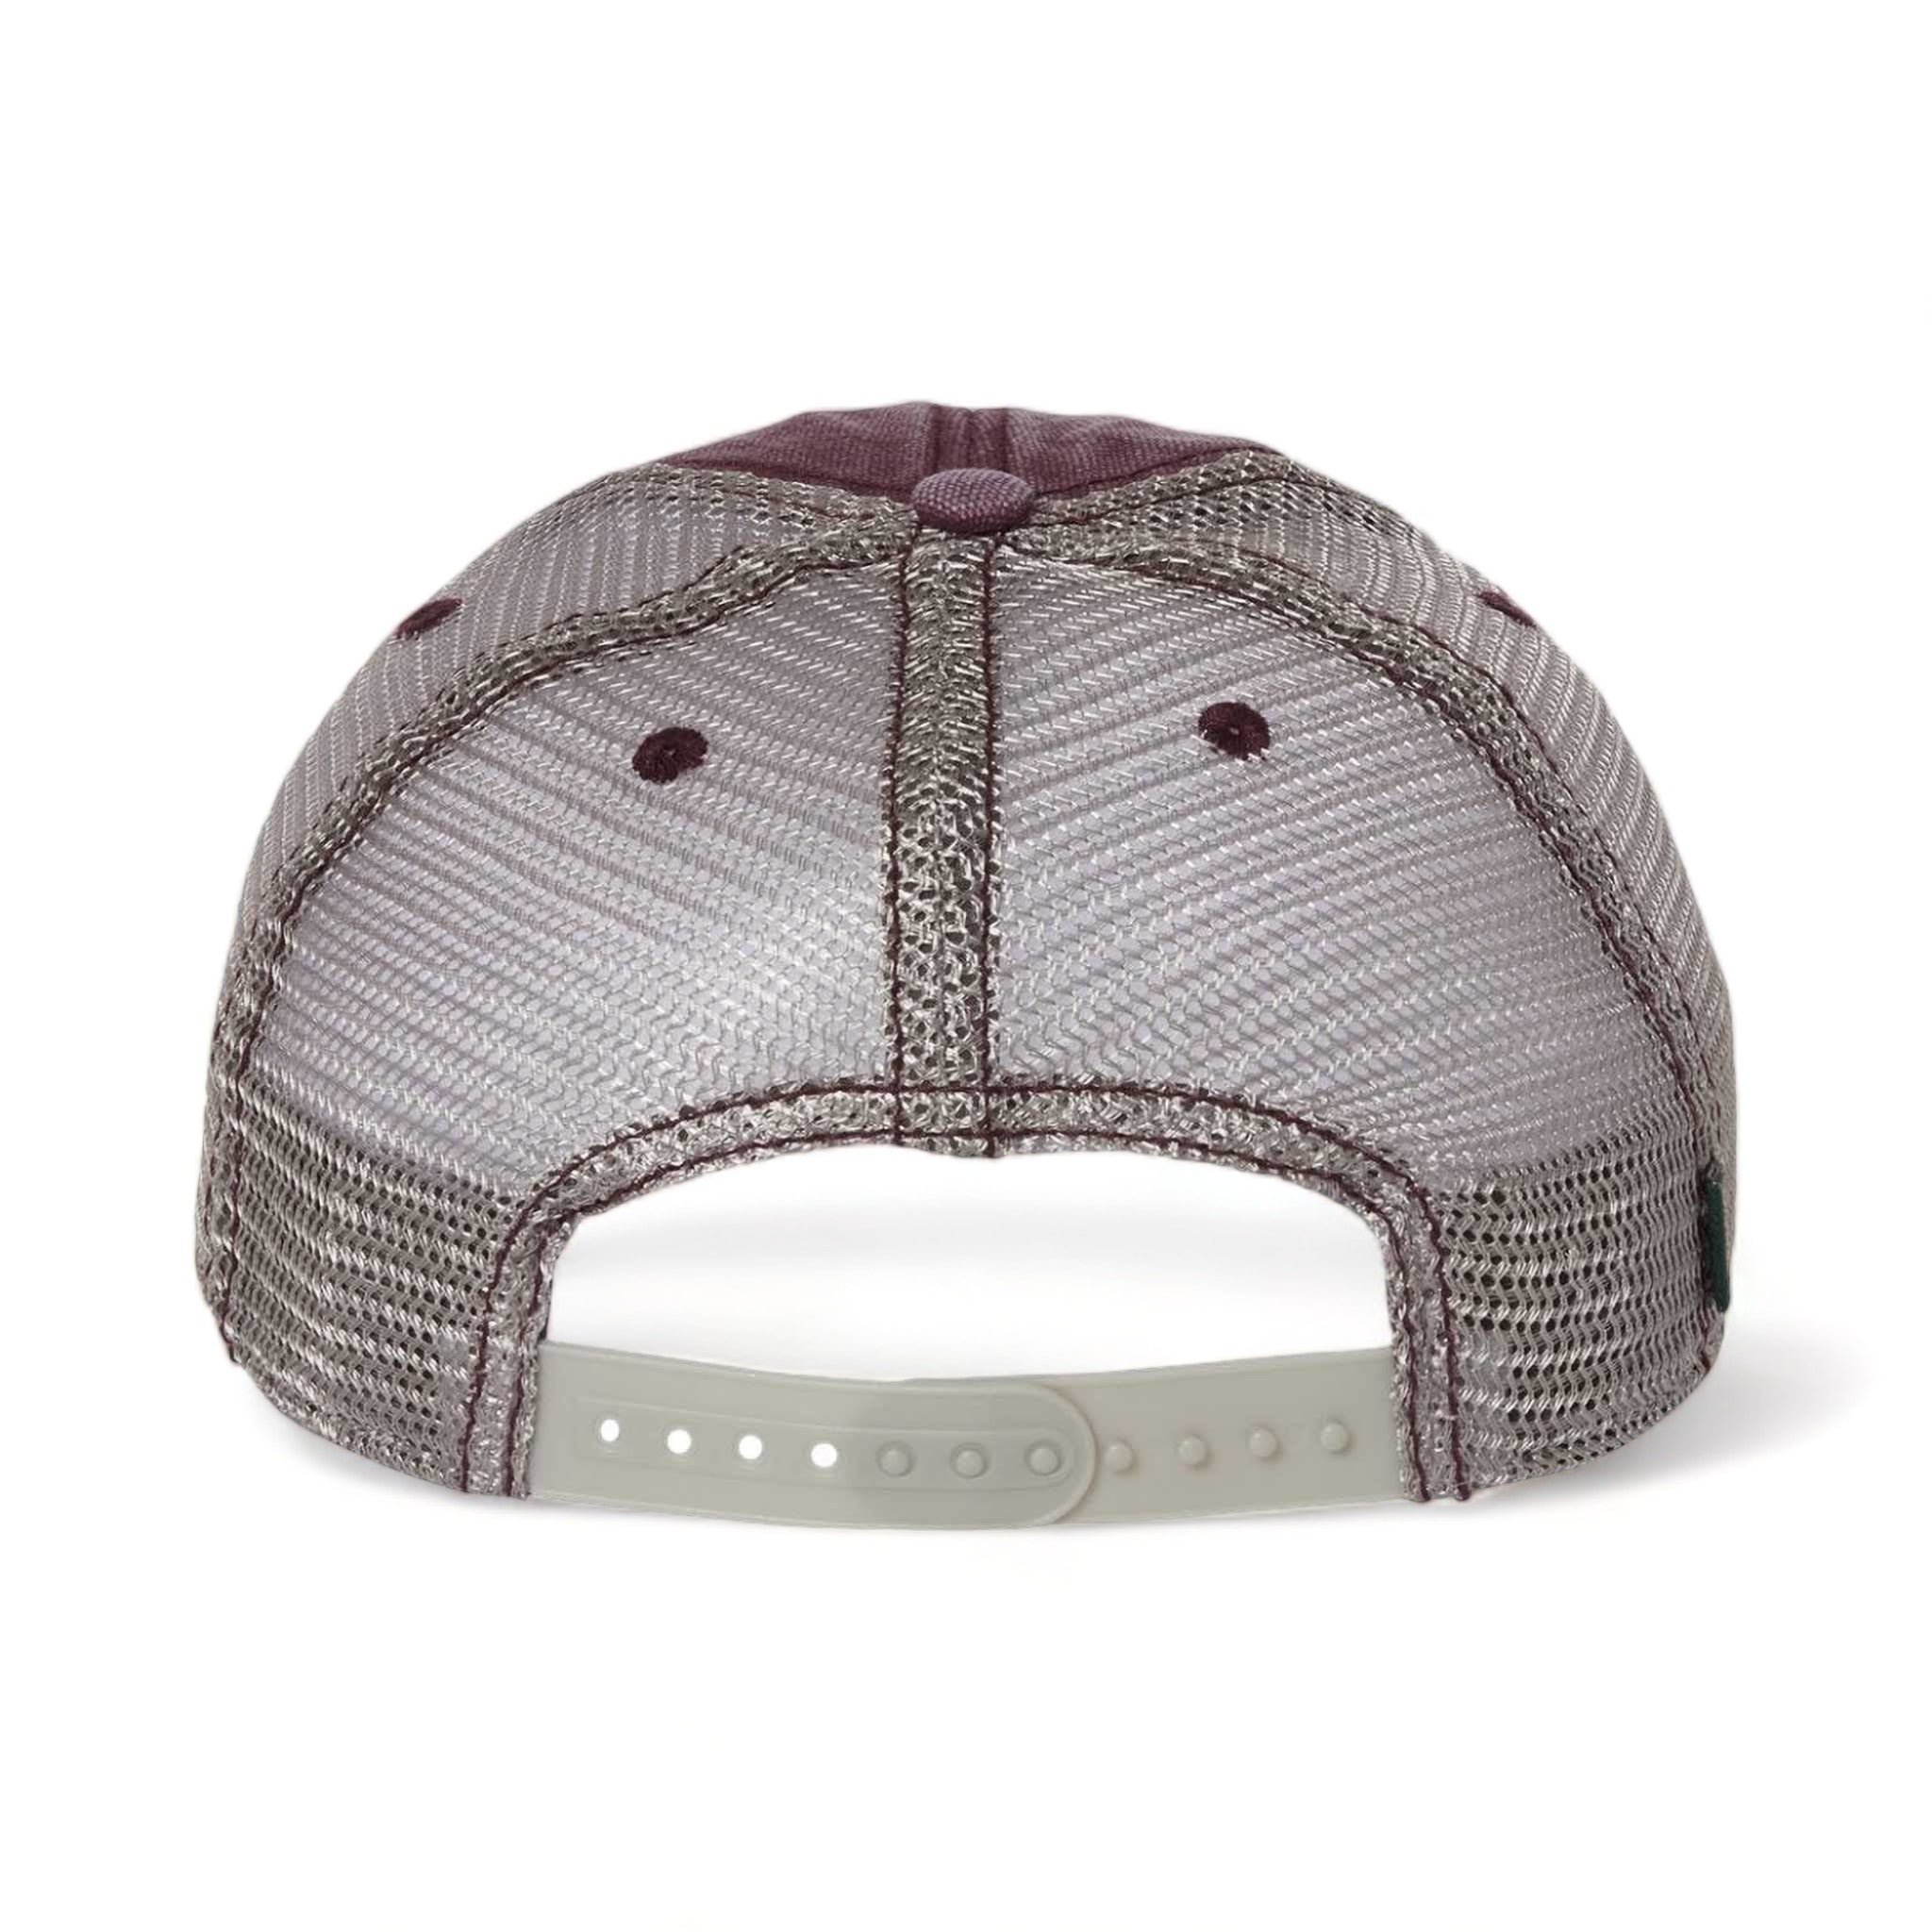 Back view of LEGACY DTA custom hat in burgundy and grey